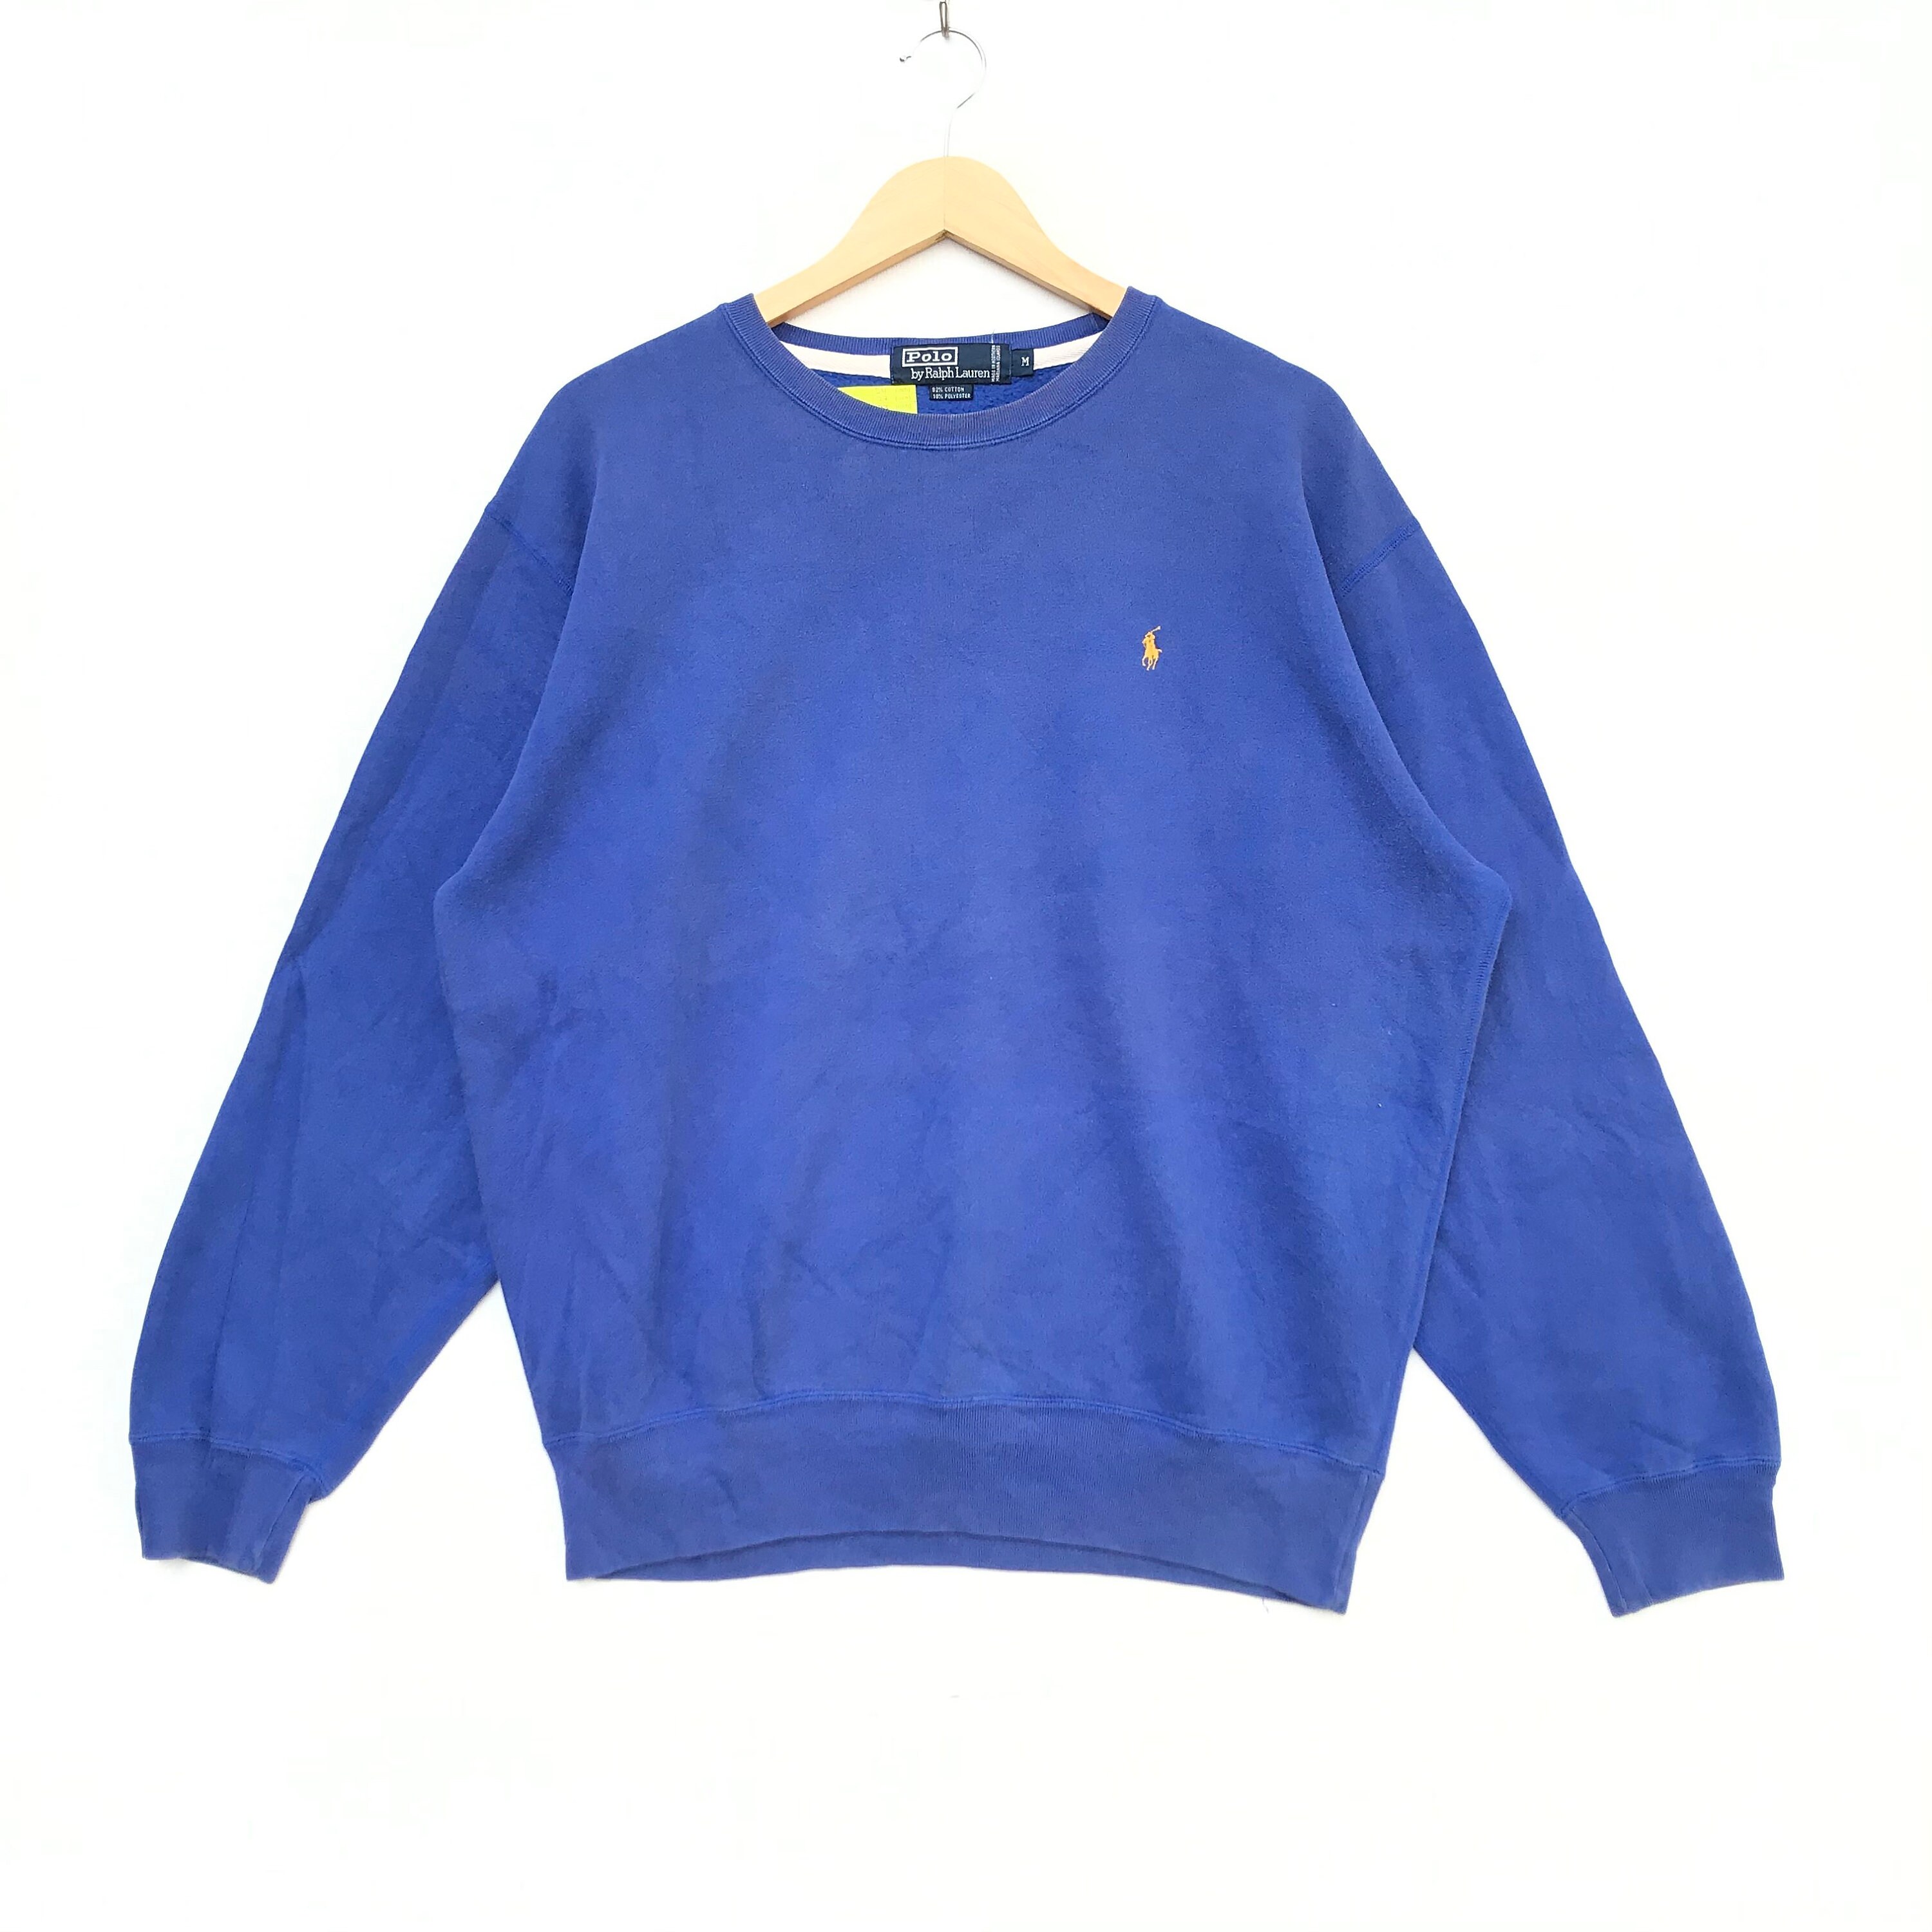 Ralph Lauren Hoodies in Different Colours and Sizes Clothing Gender-Neutral Adult Clothing Hoodies & Sweatshirts Hoodies 